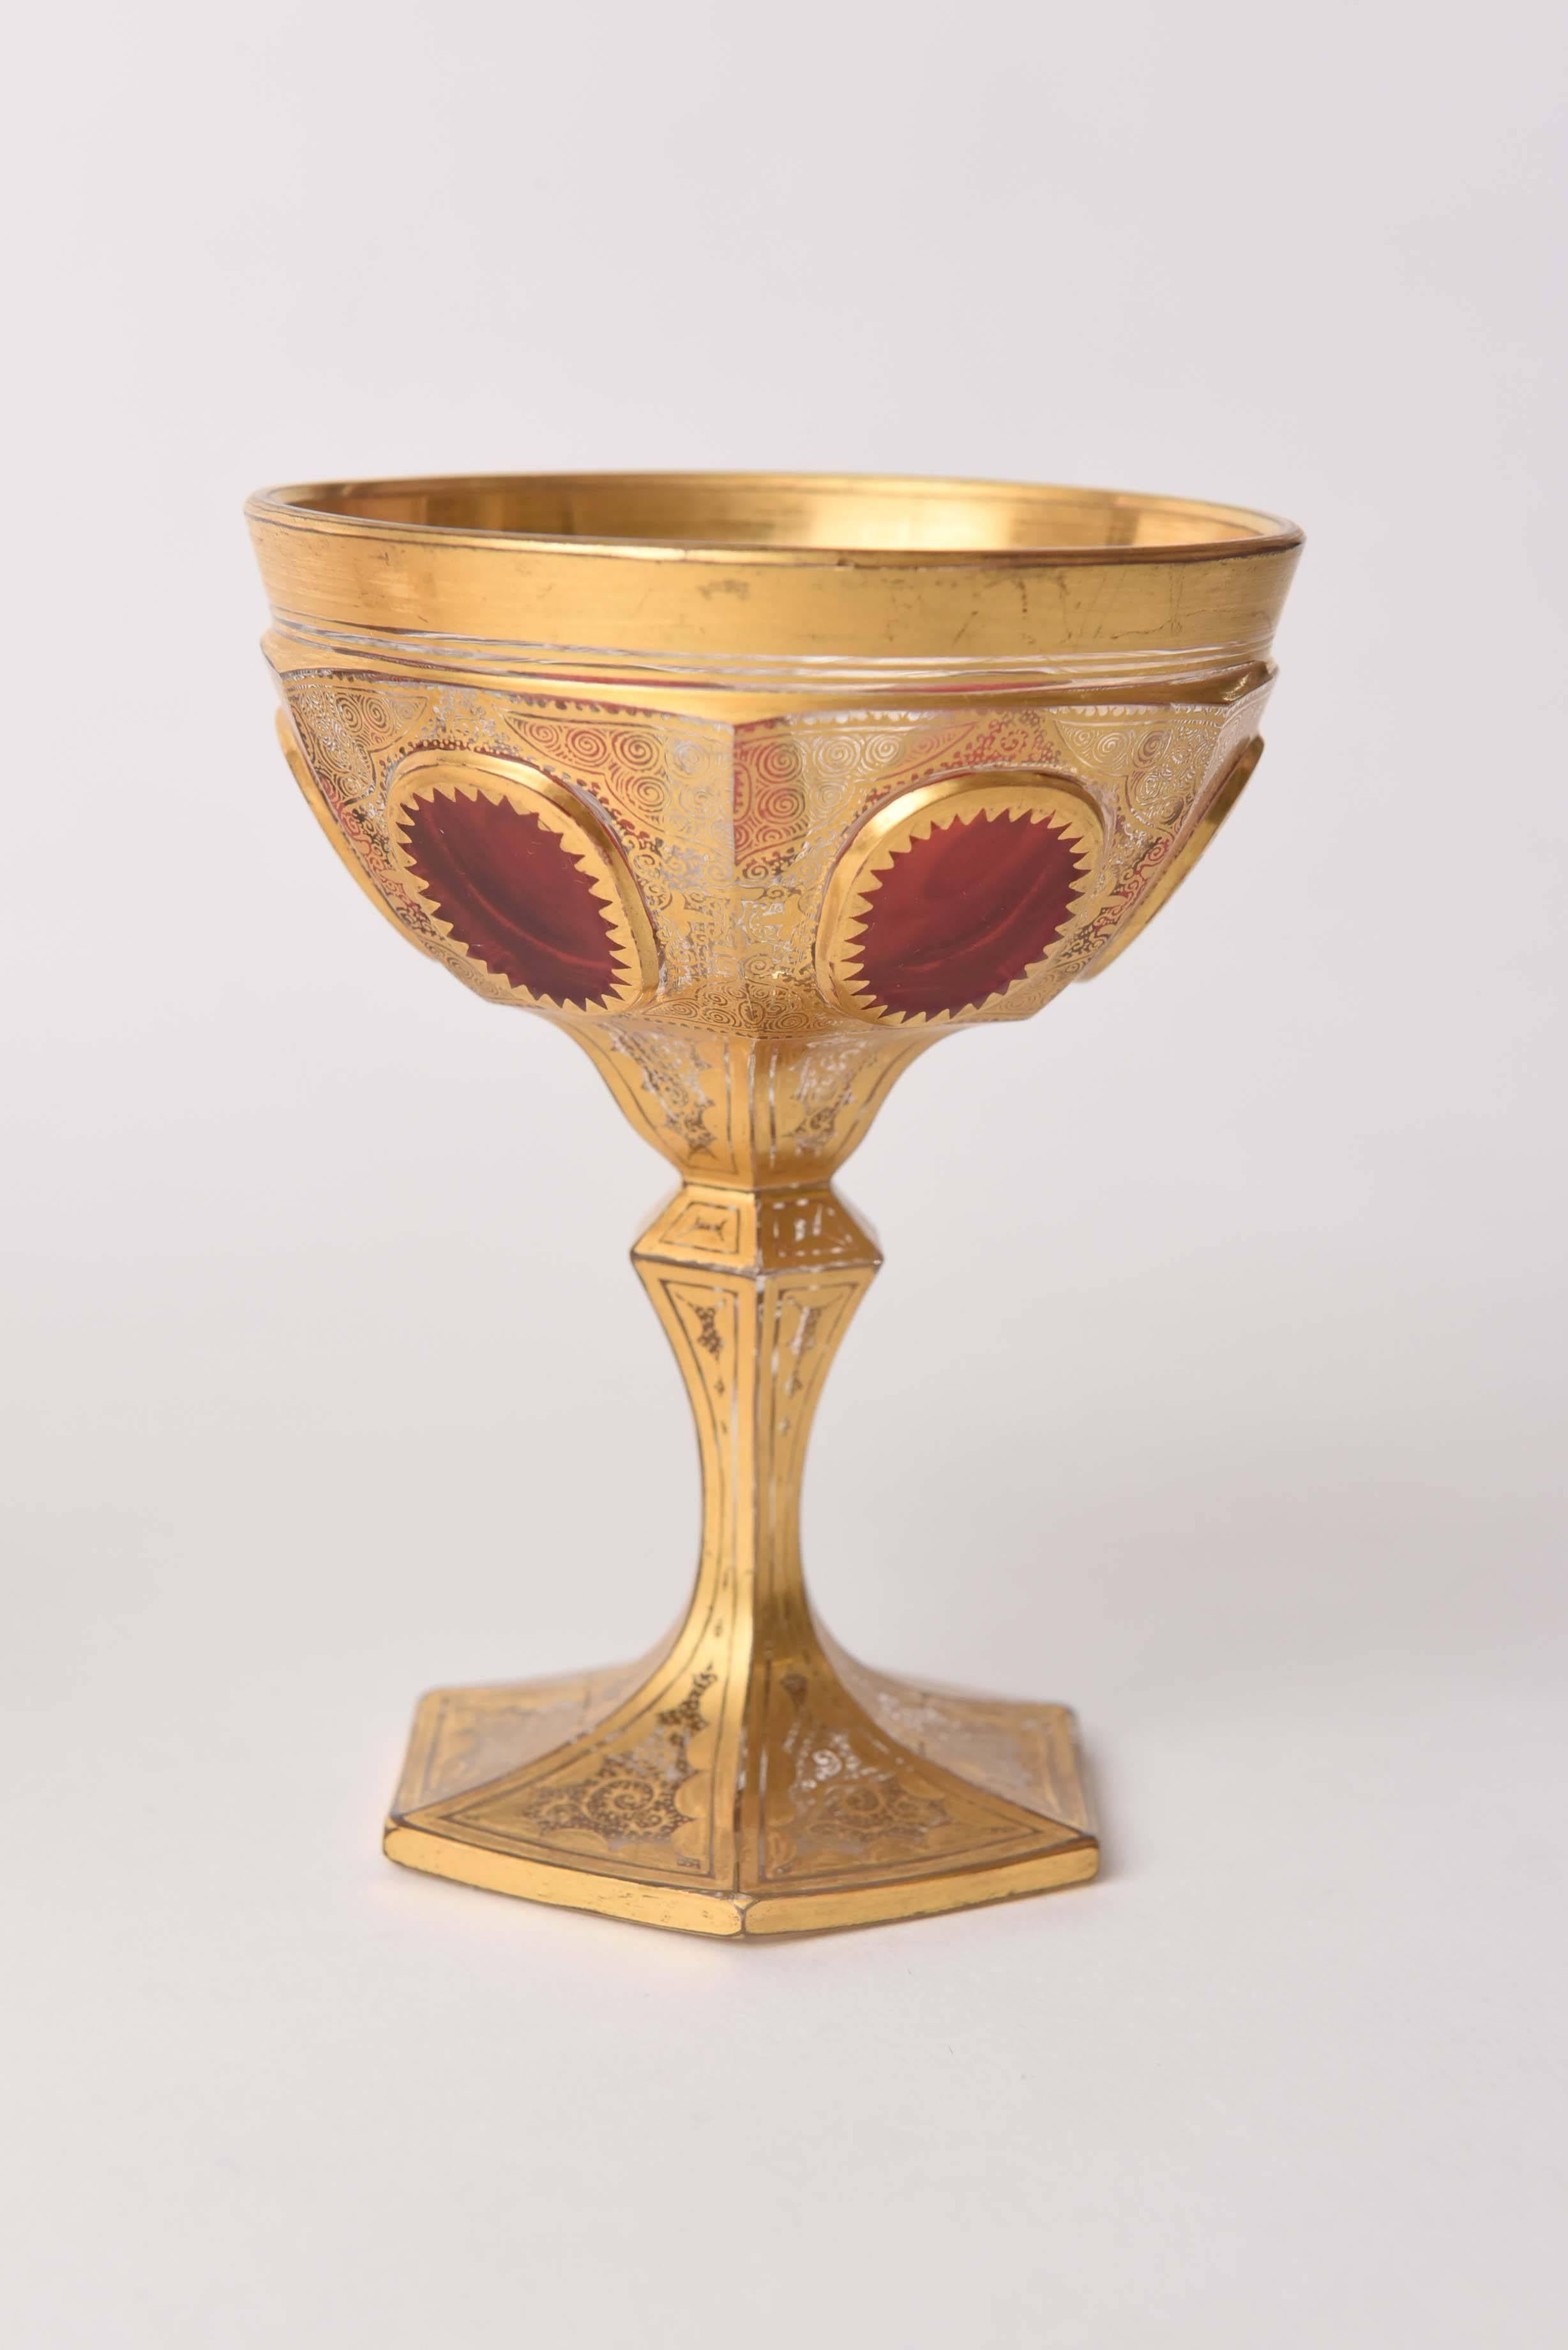 An exceptional set of free blown and hand detailed champagne coupes from Moser, The Glass of Kings. These feature a delightful chalice shape with a shaped and cut stem and base. The bowl of the champagne has carved ruby cabochon jewel styling and a